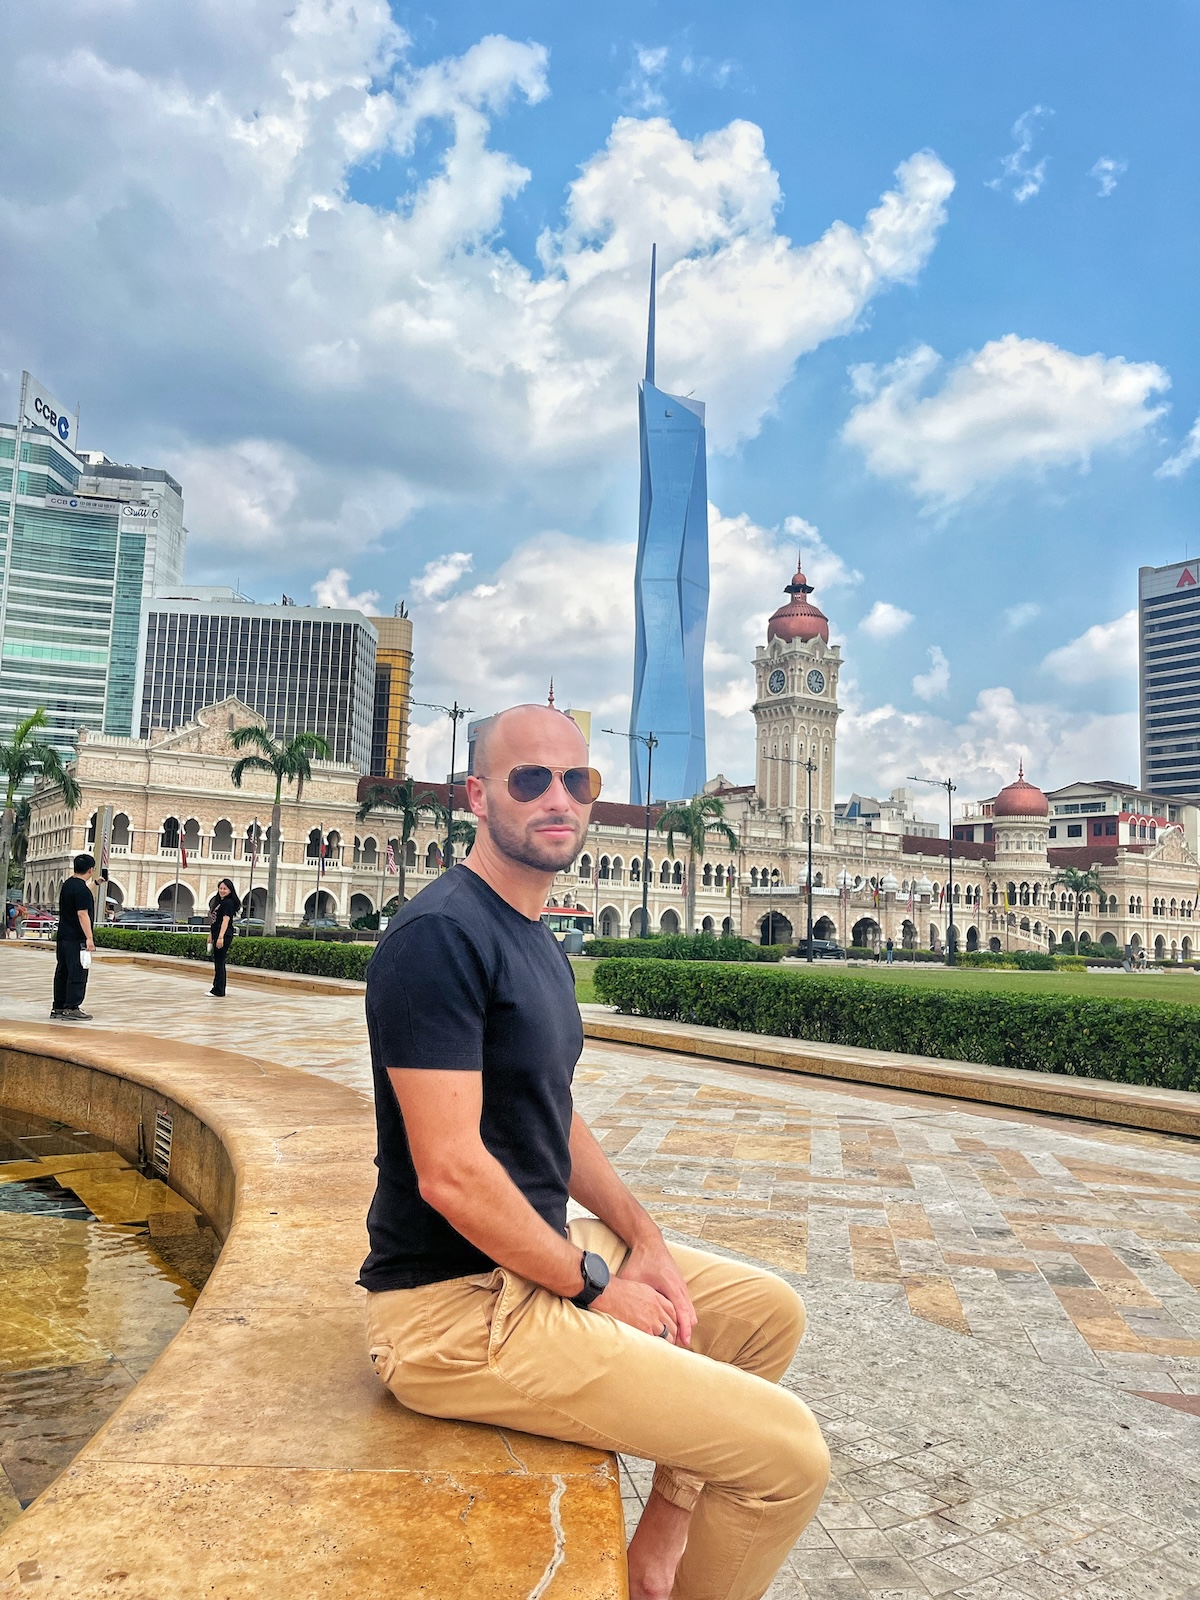 A male tourist in sunglasses poses in front of a striking government building and modern architecture in Kuala Lumpur, Malaysia 